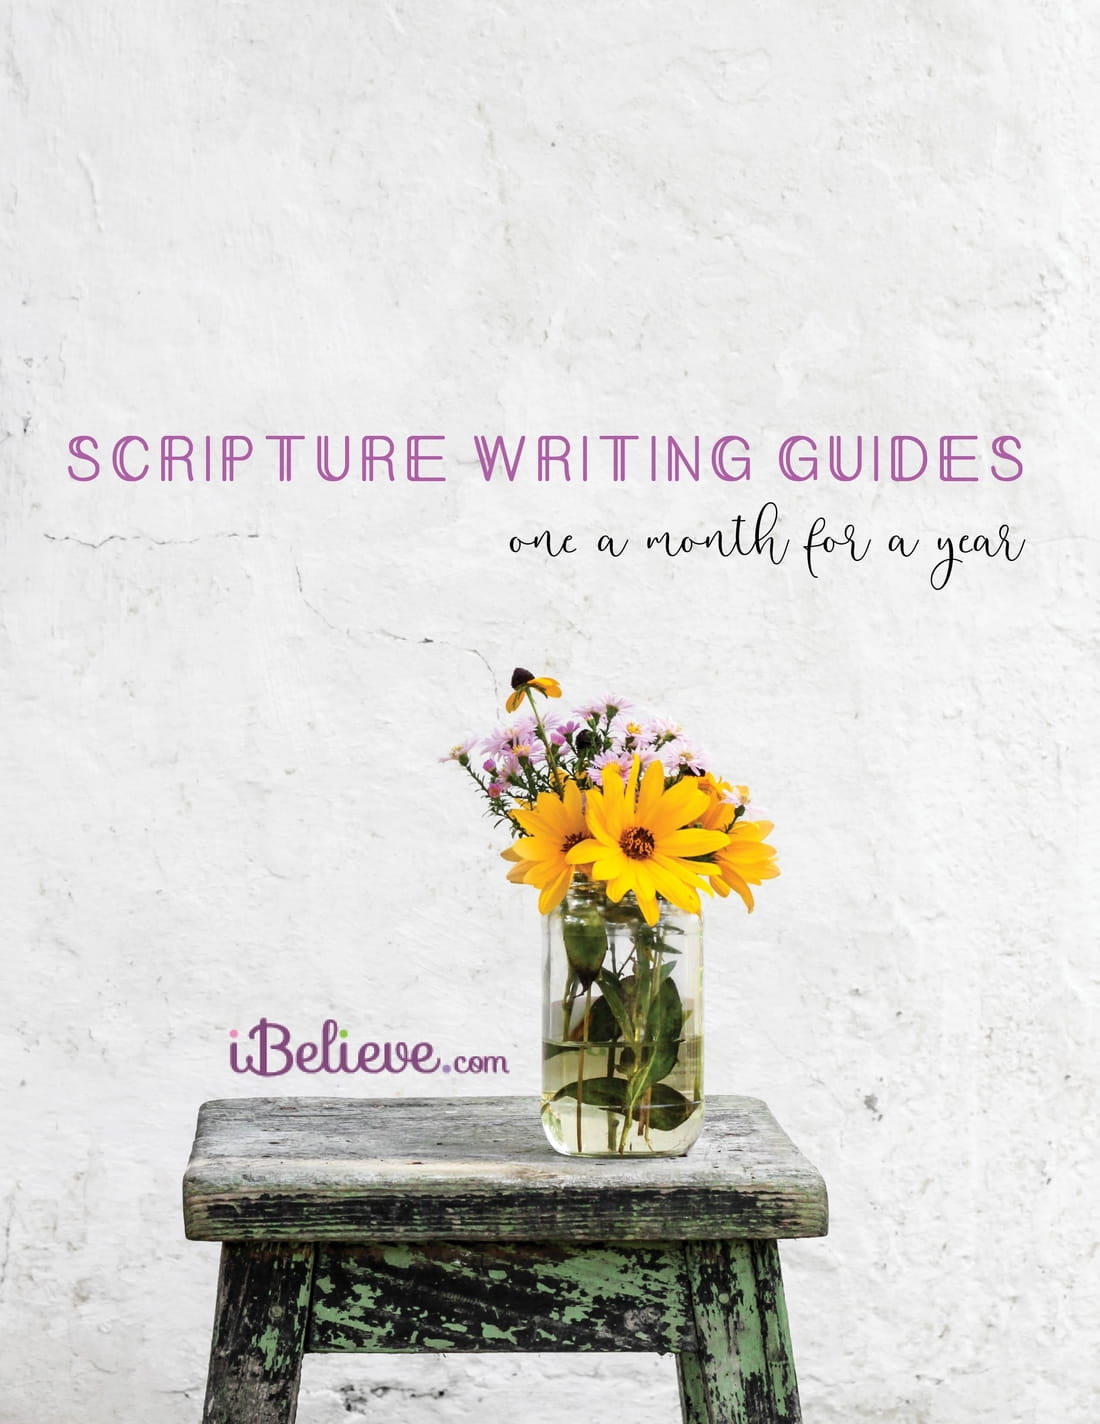 Scripture Writing Guides - One a Month for a Year